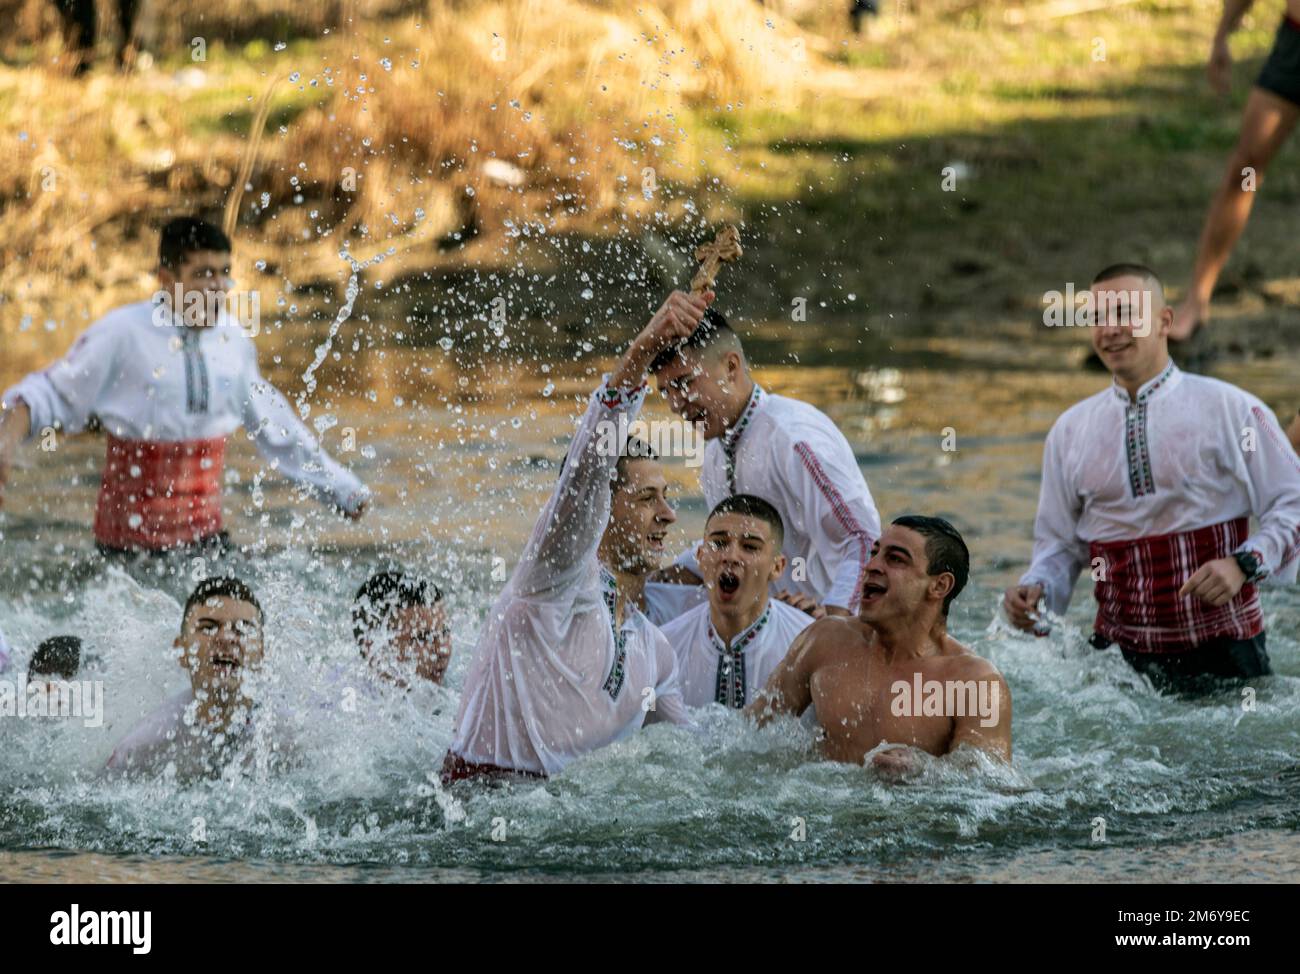 Bulgaria Elhovo January 6 2023: Young men every year dash into icy waters  of a local rivers, Bulgarian Orthodox church marks St. Jordan's Day  (Epiphany). It falls on the twelfth day after